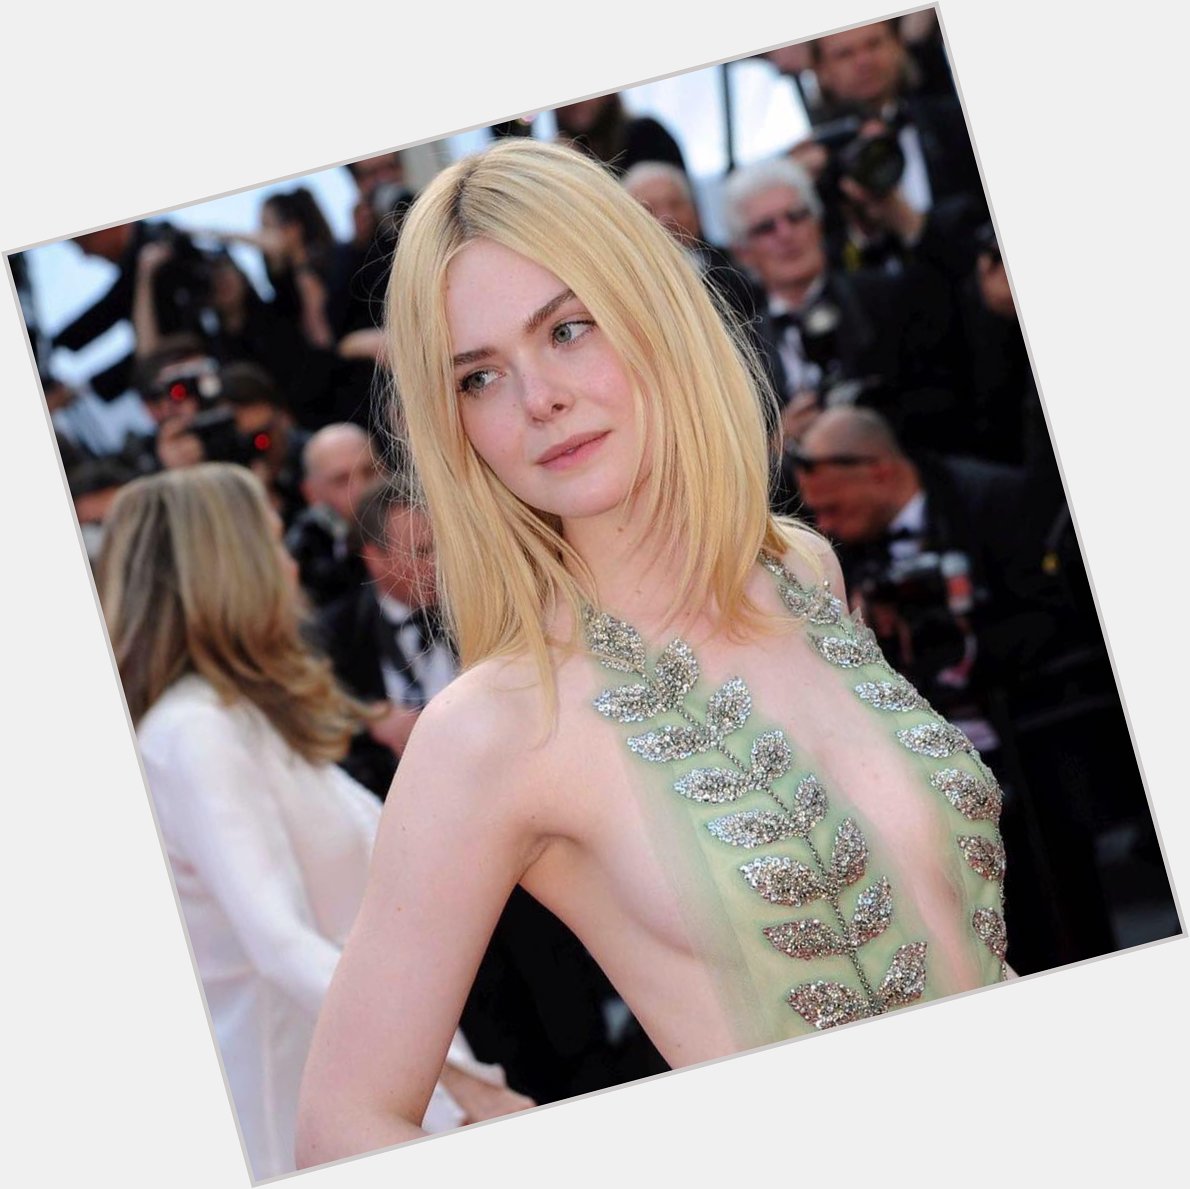 Happy 21st Birthday to the perfect pale angel that is Elle Fanning 